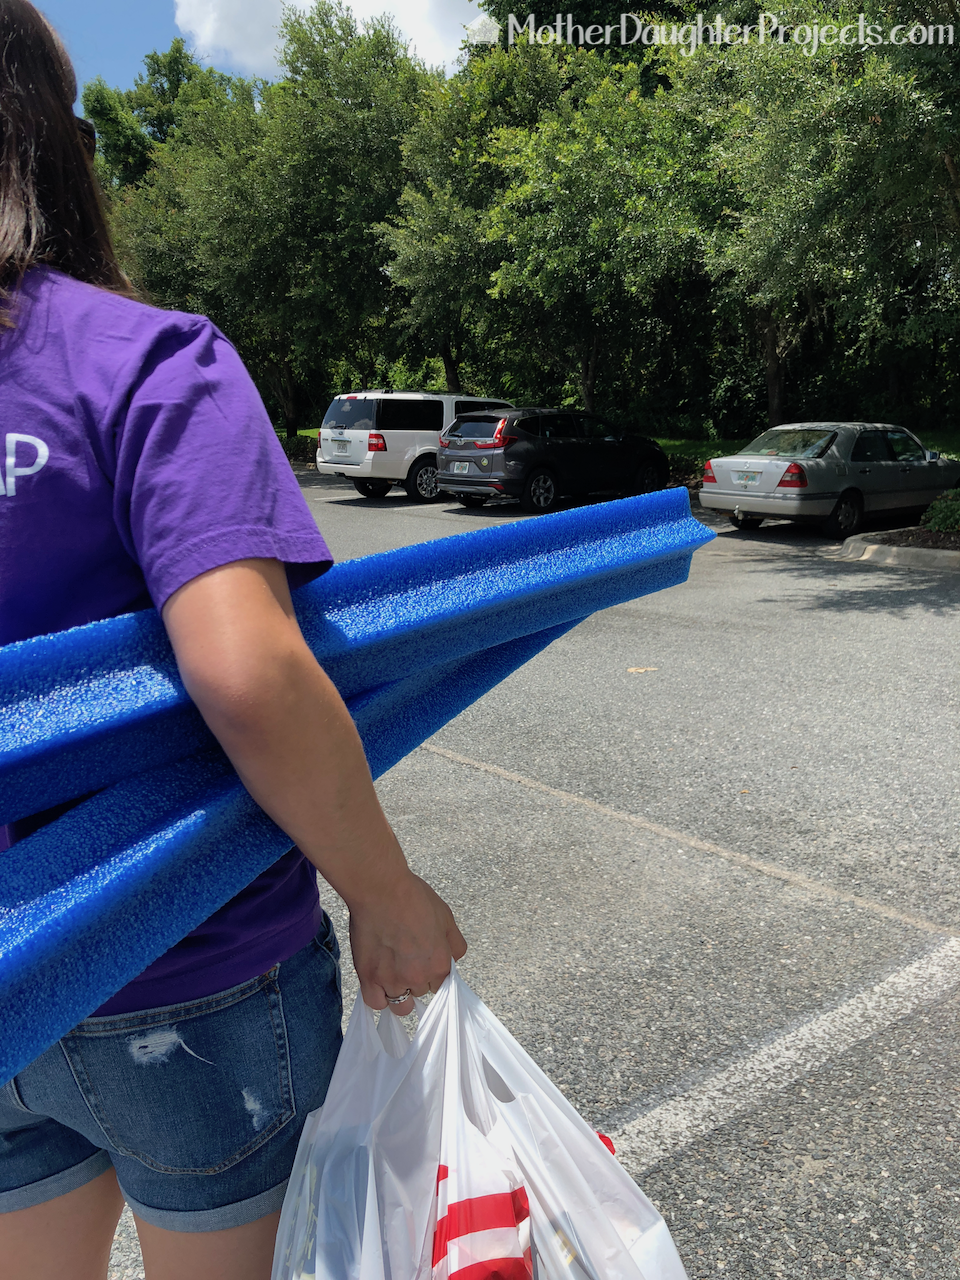 We purchased two blue pool noodles. 